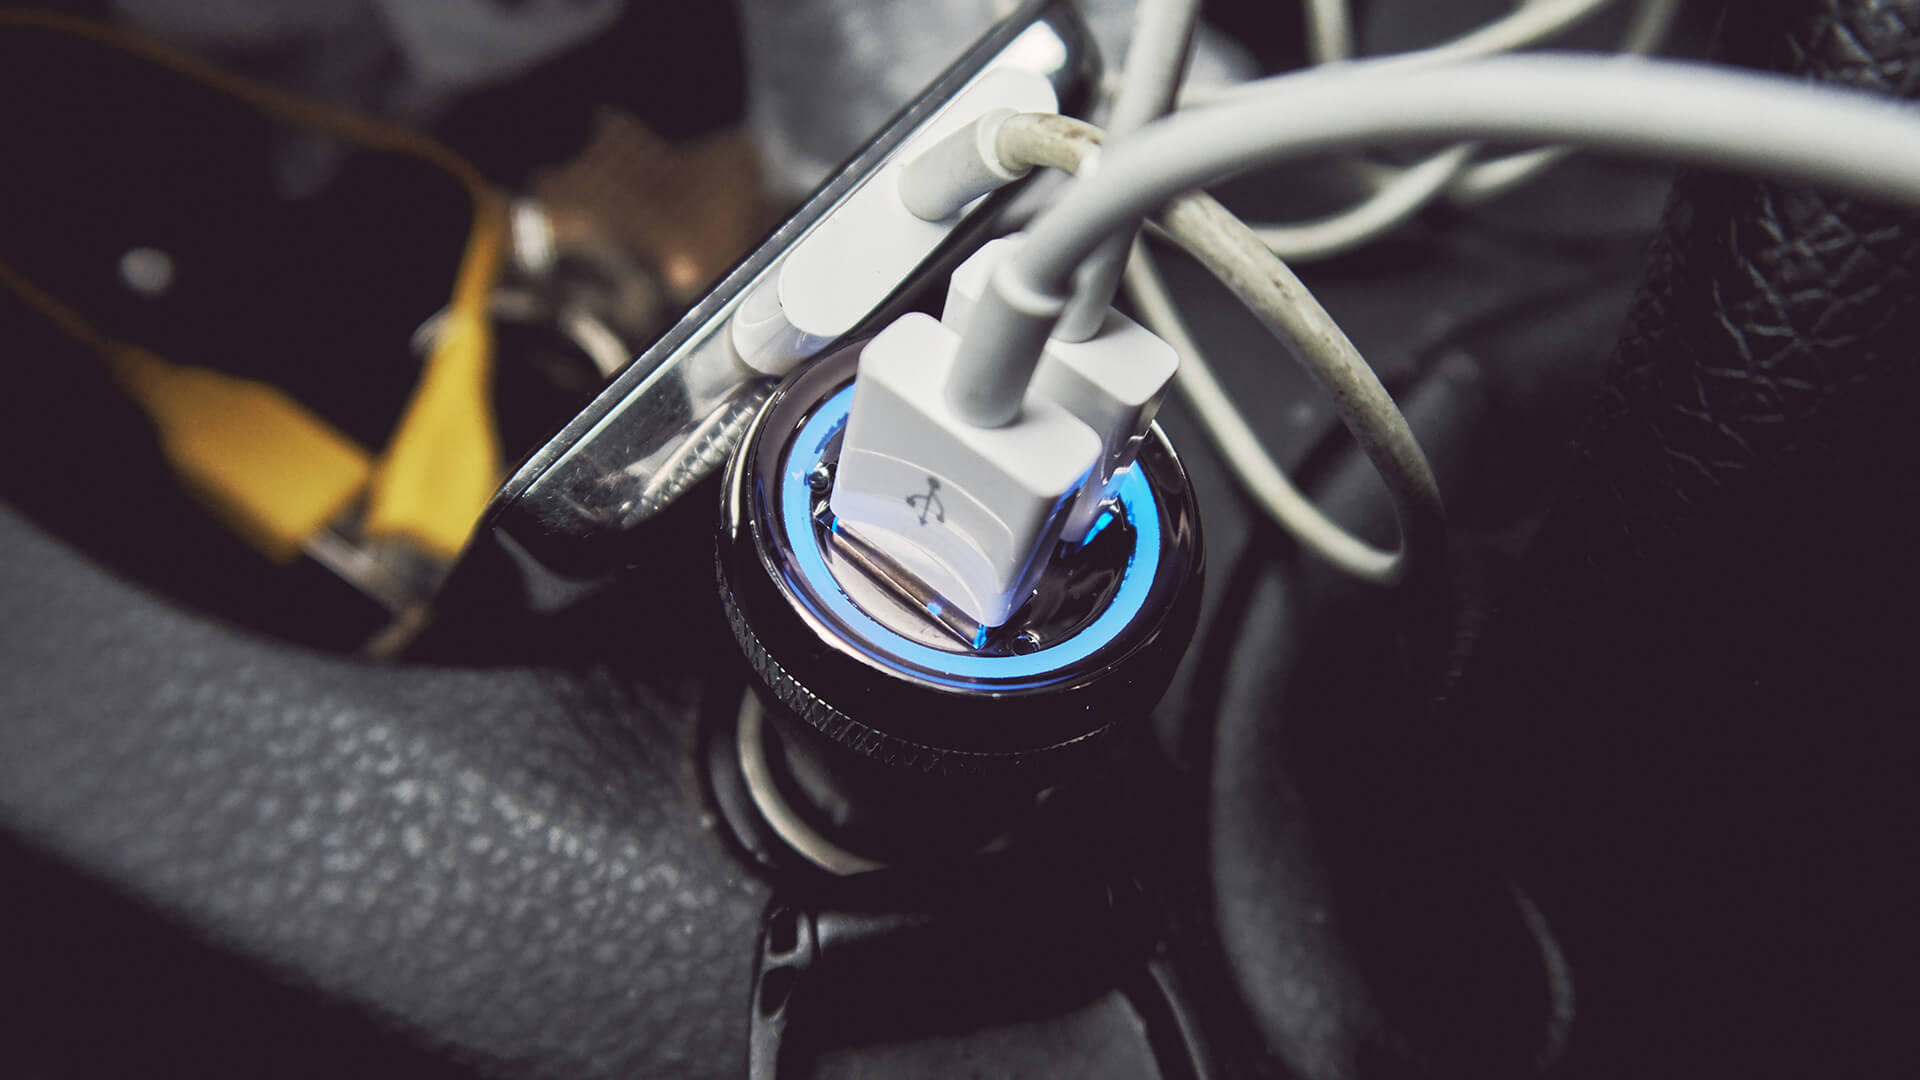 Sommer PNY: Family Car Charger